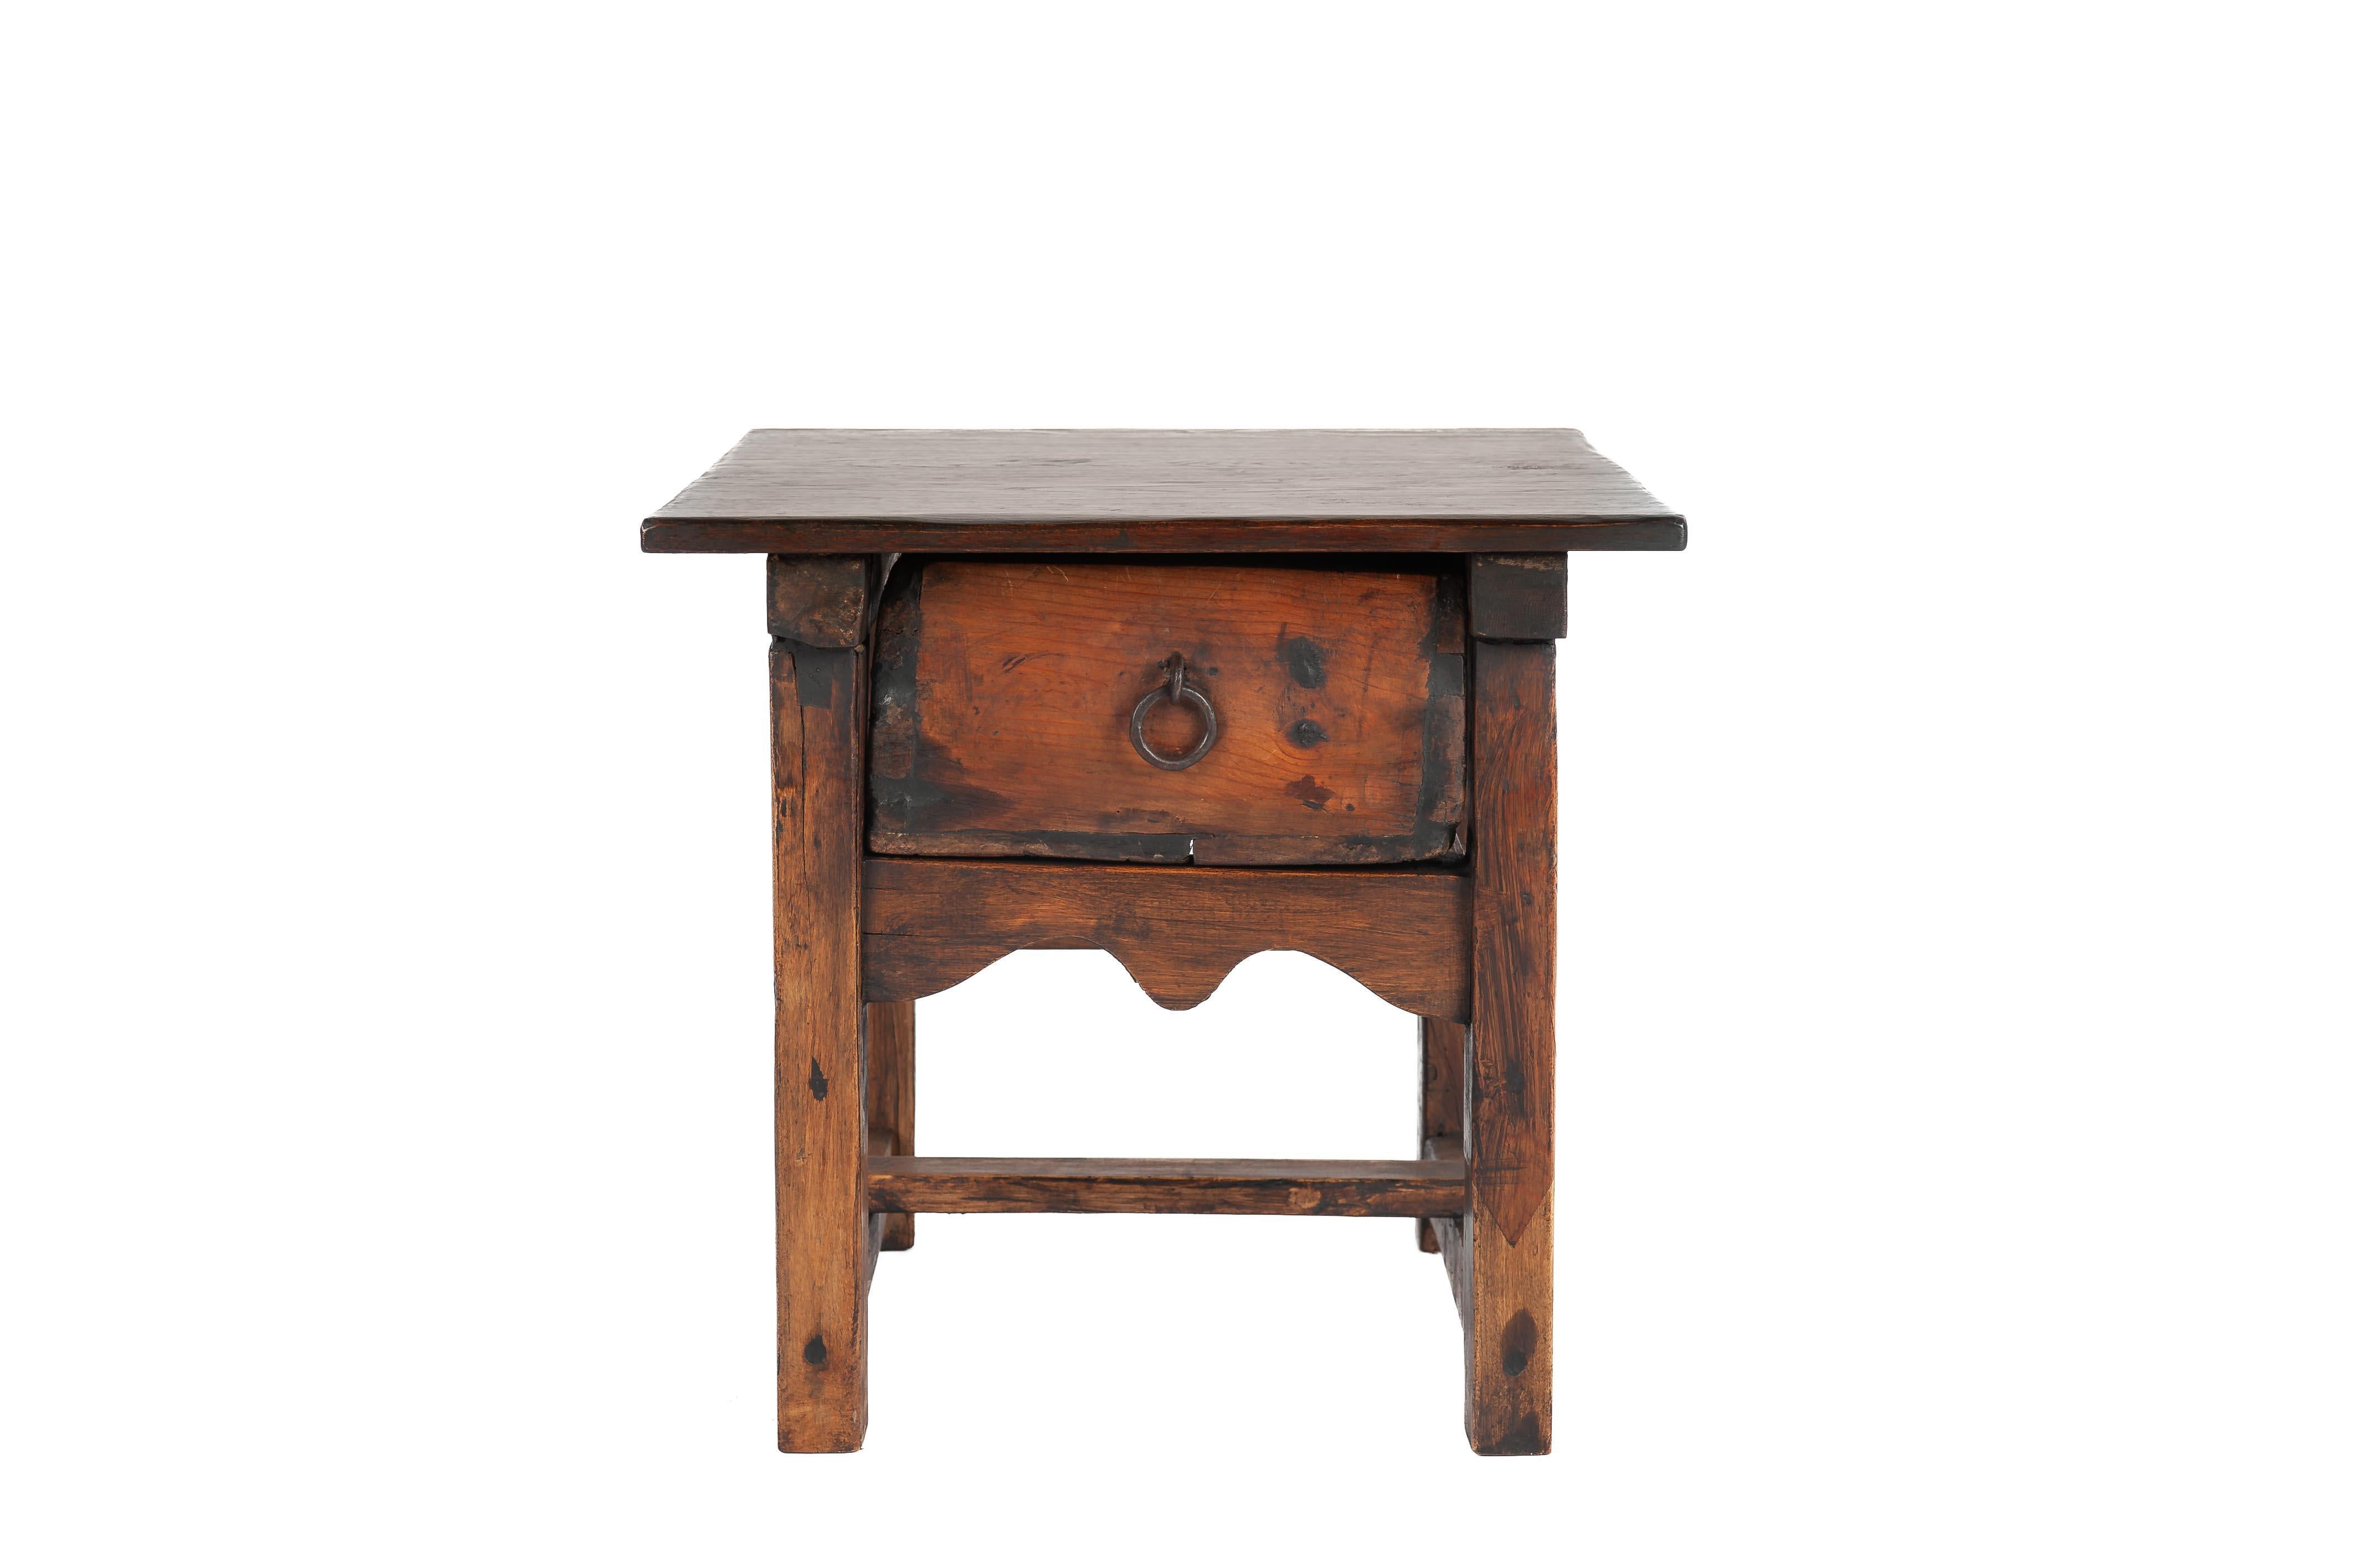 A beautiful antique side table or occasional table that was made in rural Spain circa 1820. The solid hand-carved oak rectangular top was made from a single board of wood and was jointed to the pine base by dovetail joints. The table features a